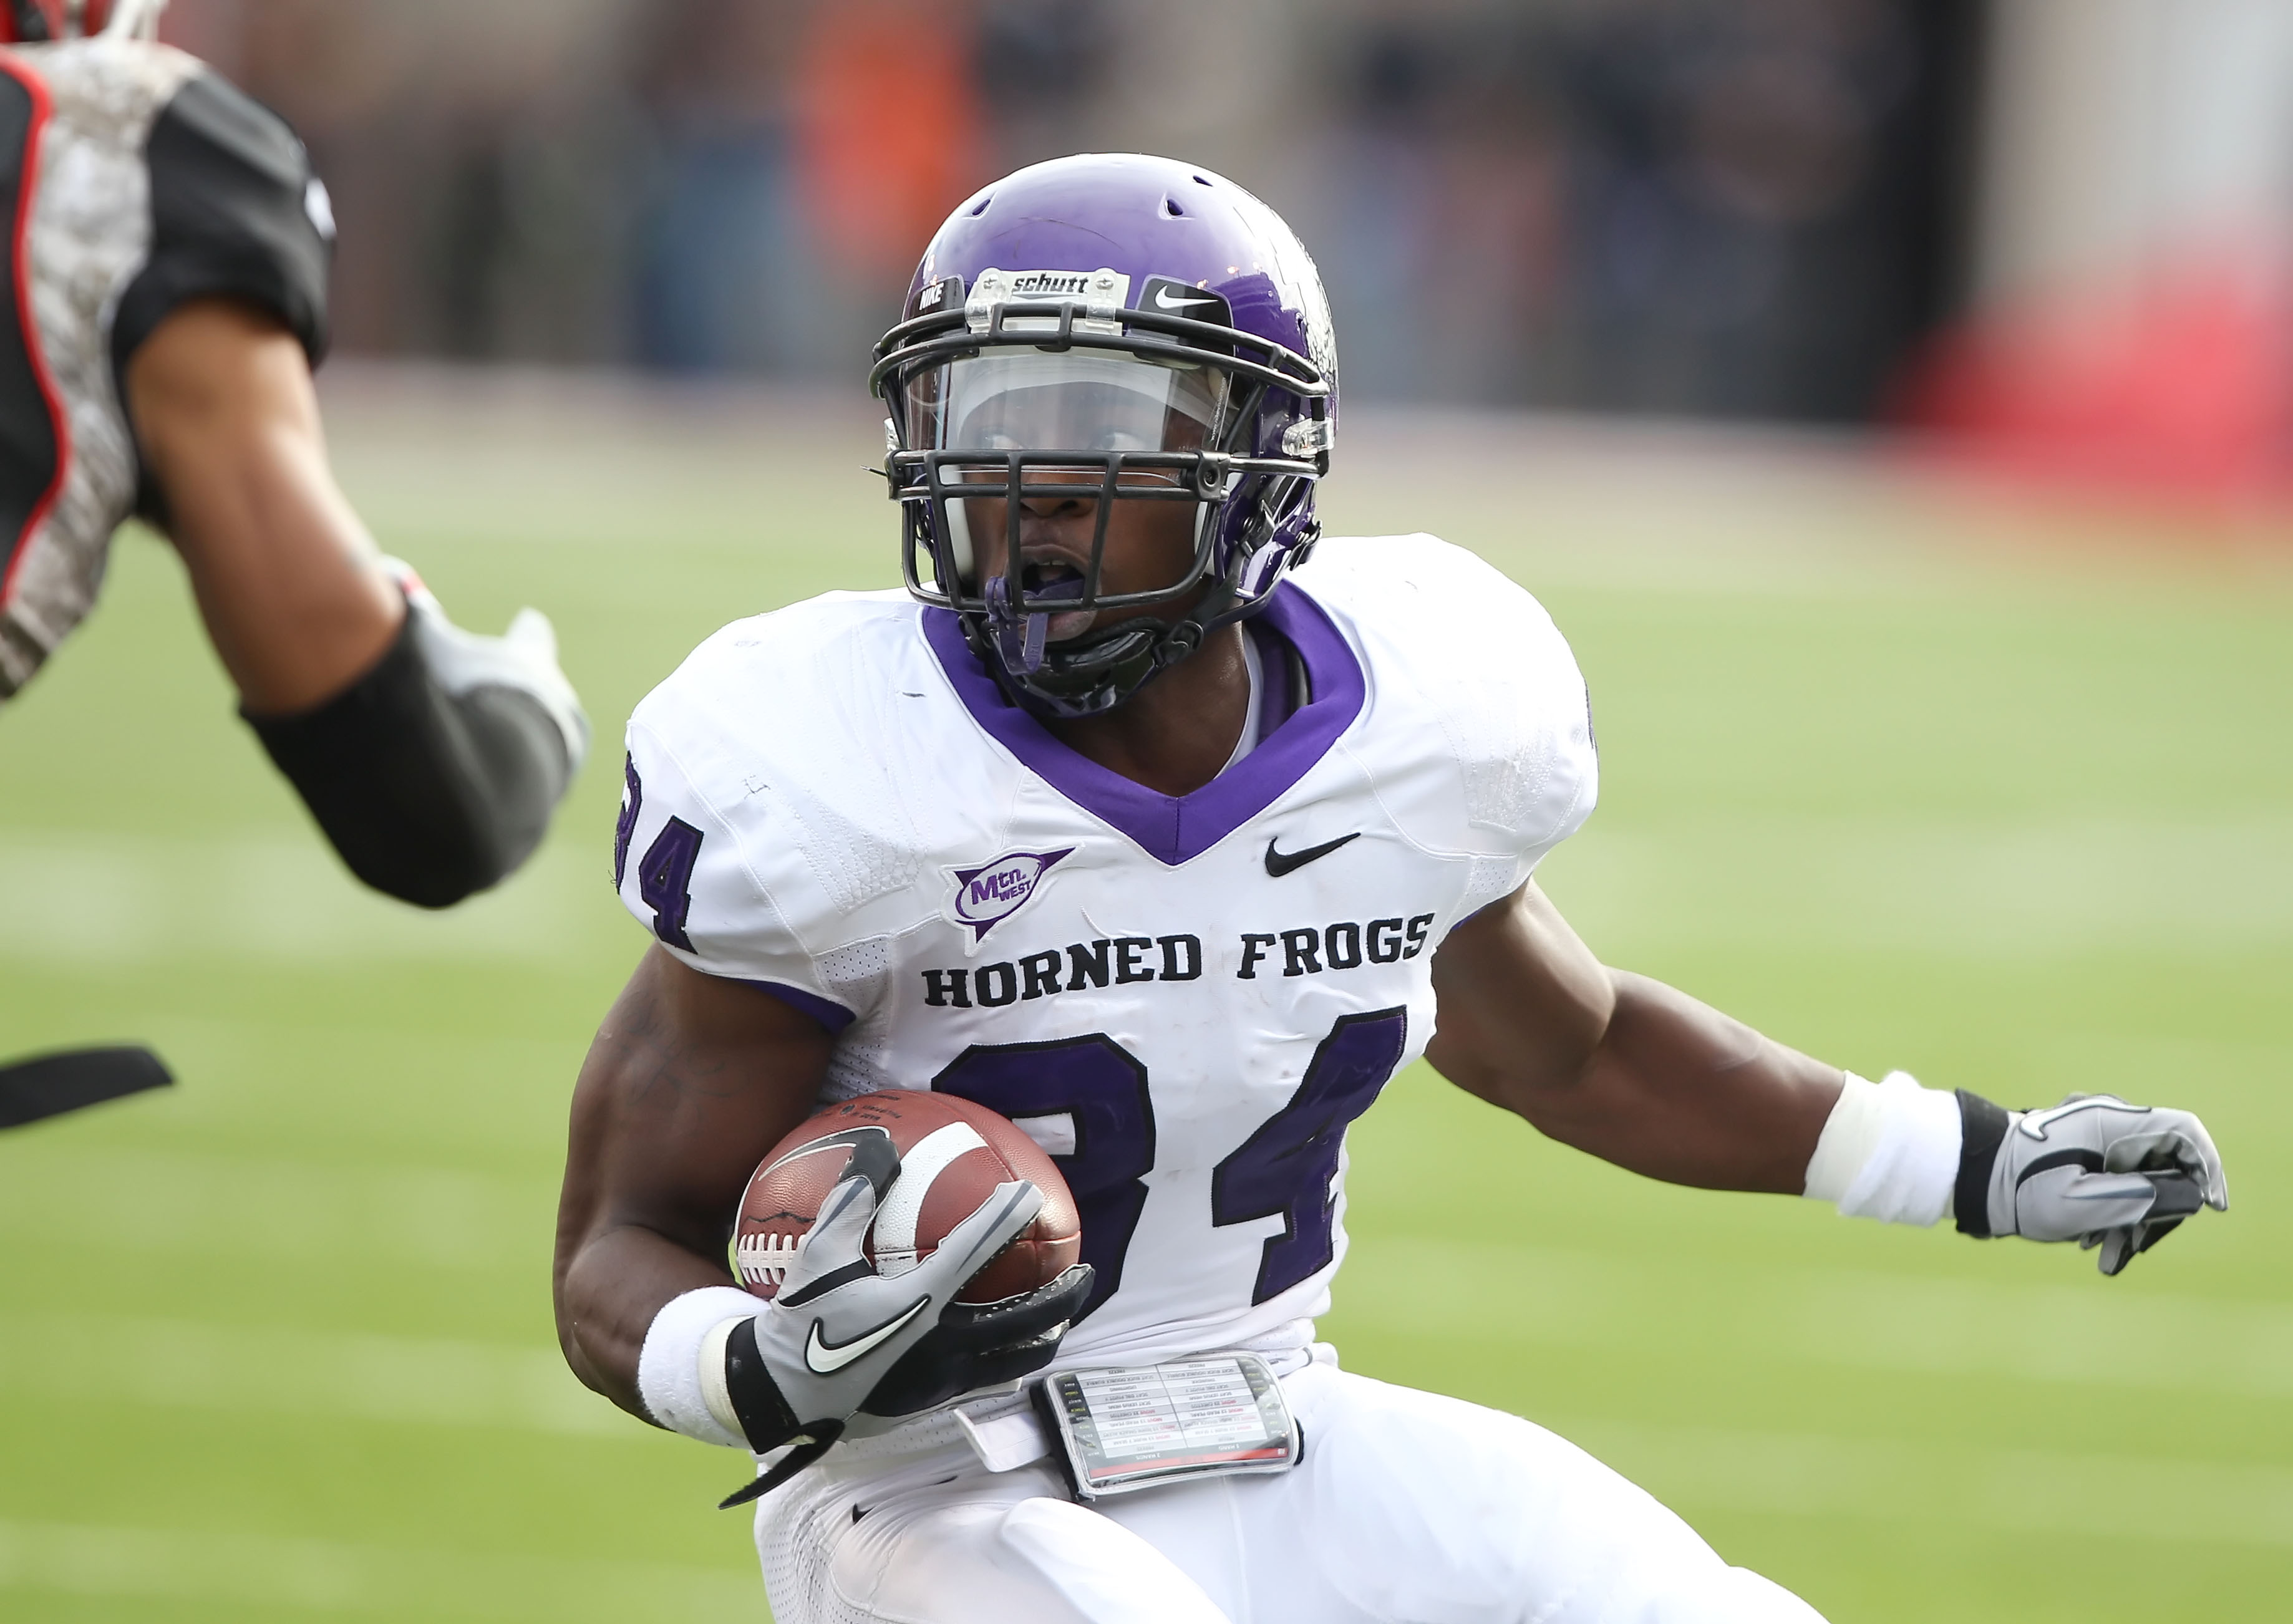 Tcu Football Do They Have A Shot At The Bcs Championship Game News Scores Highlights 8983